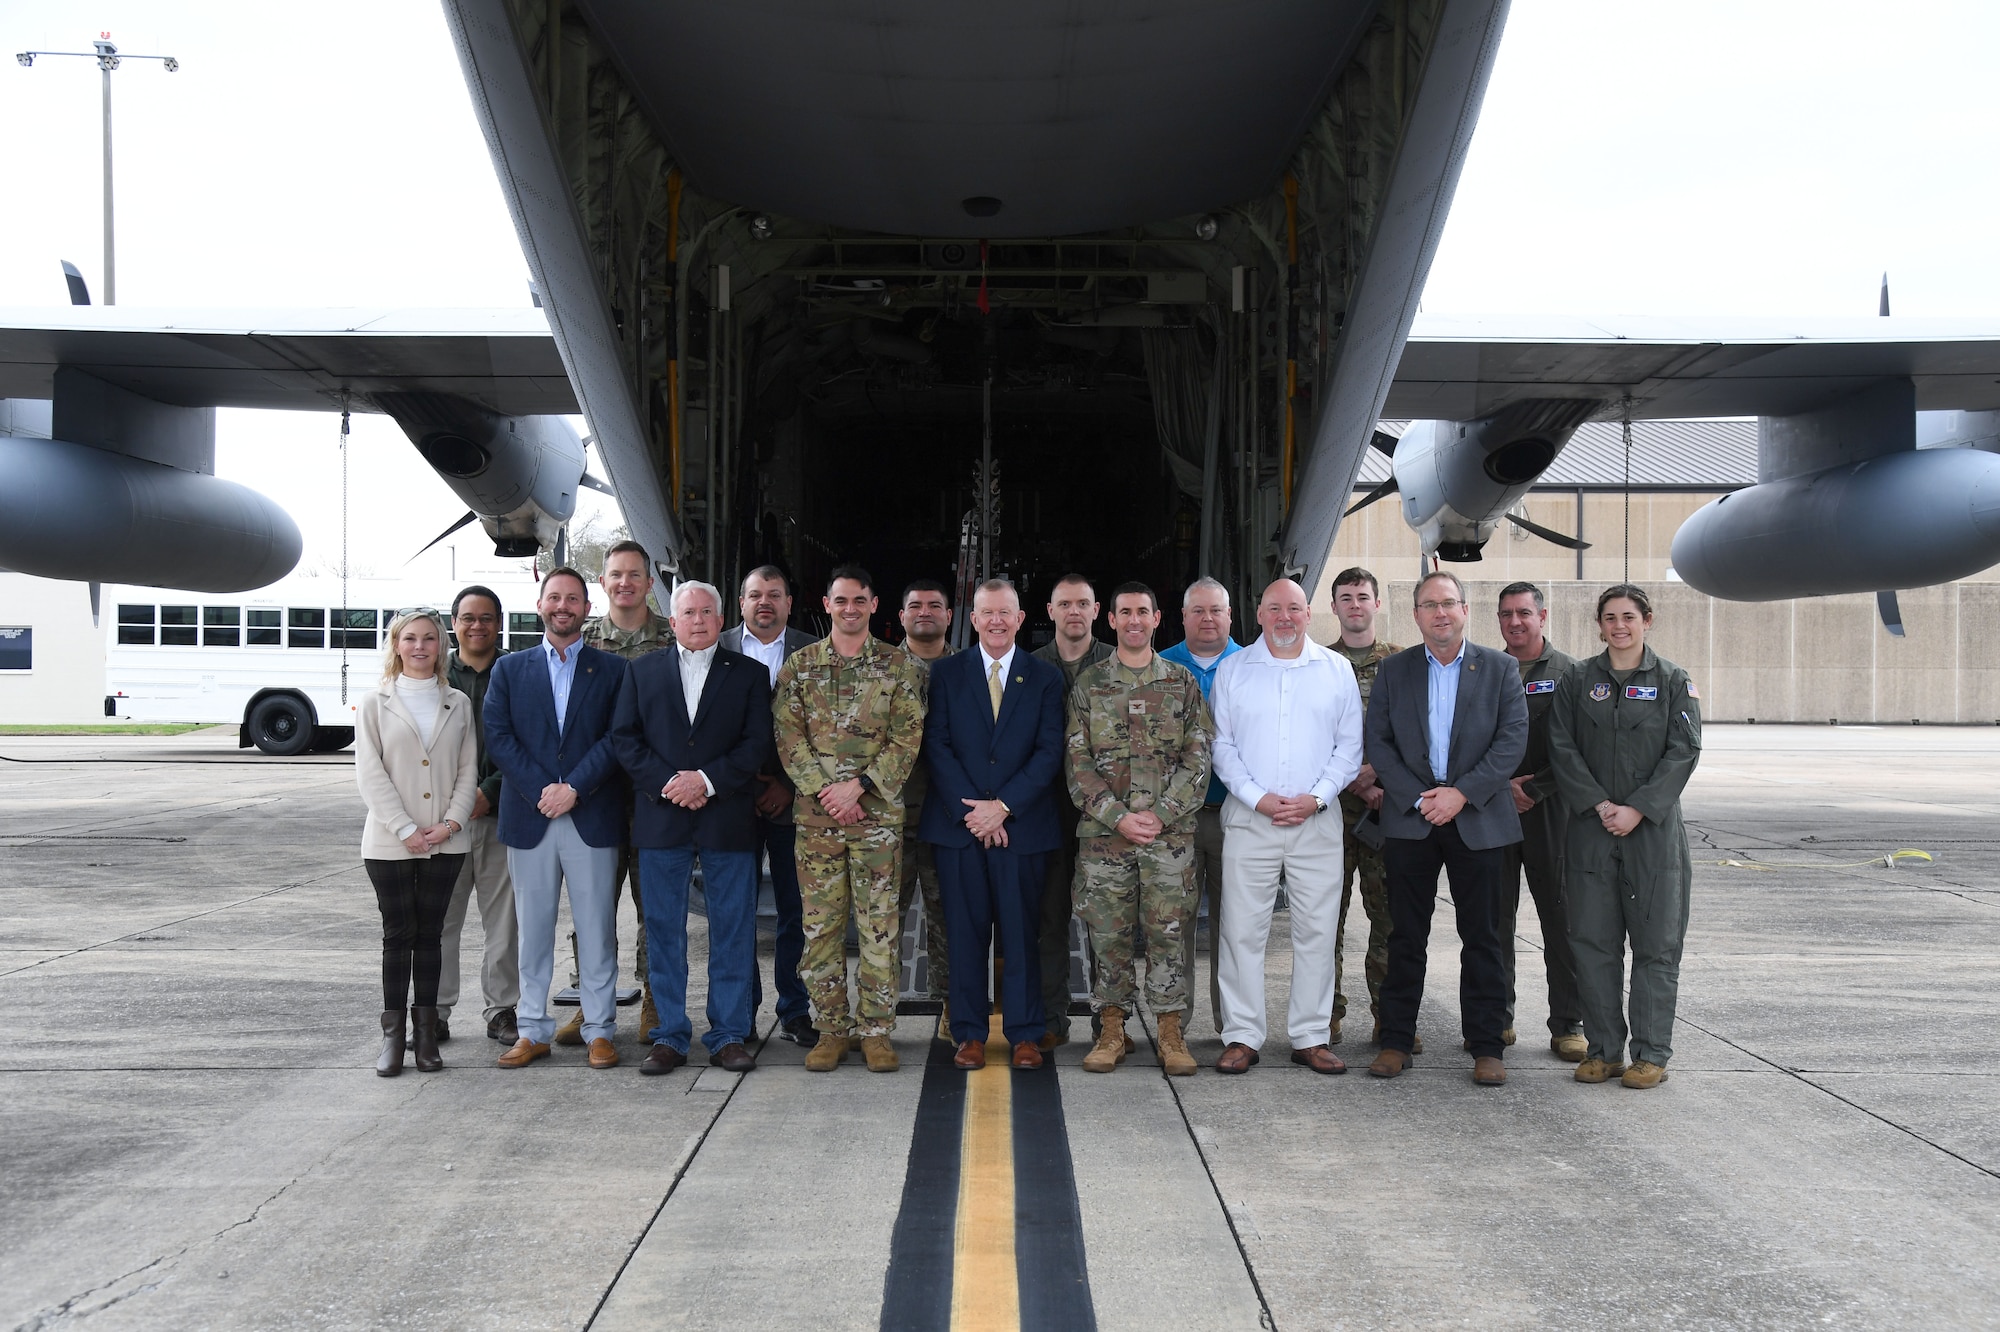 Keesler leadership poses for a group photo with Congressman Mike Ezell, South Mississippi 4th Congressional District representative, and his staff, during an immersion tour at Keesler Air Force Base, Mississippi, Feb. 15, 2023.